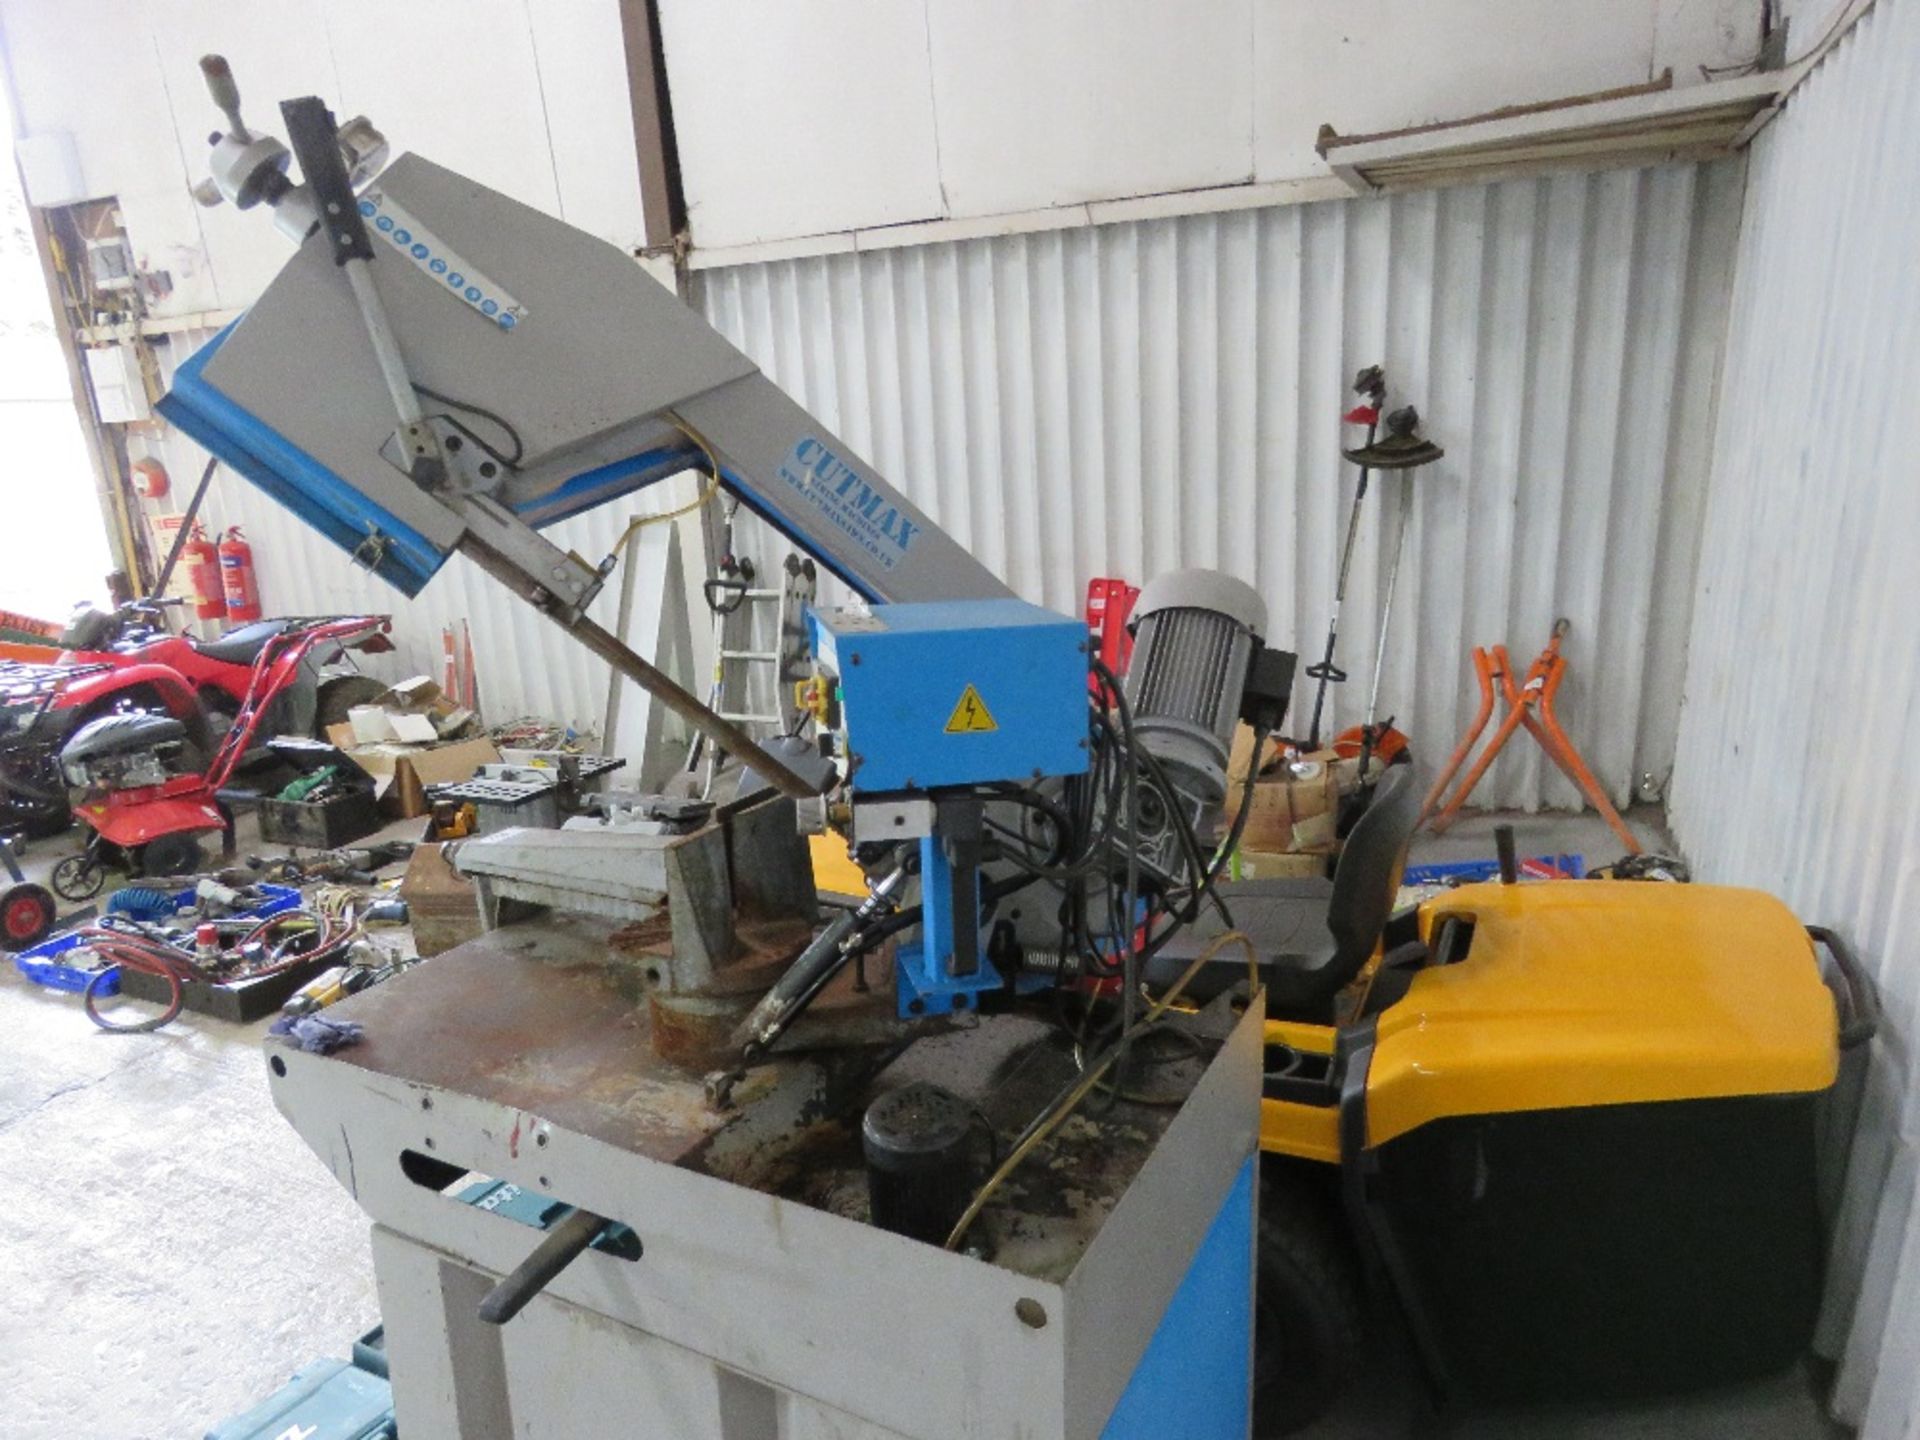 AUTOCUT YCM285 3 PHASE POWERED BANDSAW. SOURCED FROM SCHOOL, WORKING WHEN REMOVED. THIS LOT IS SOLD - Image 4 of 4